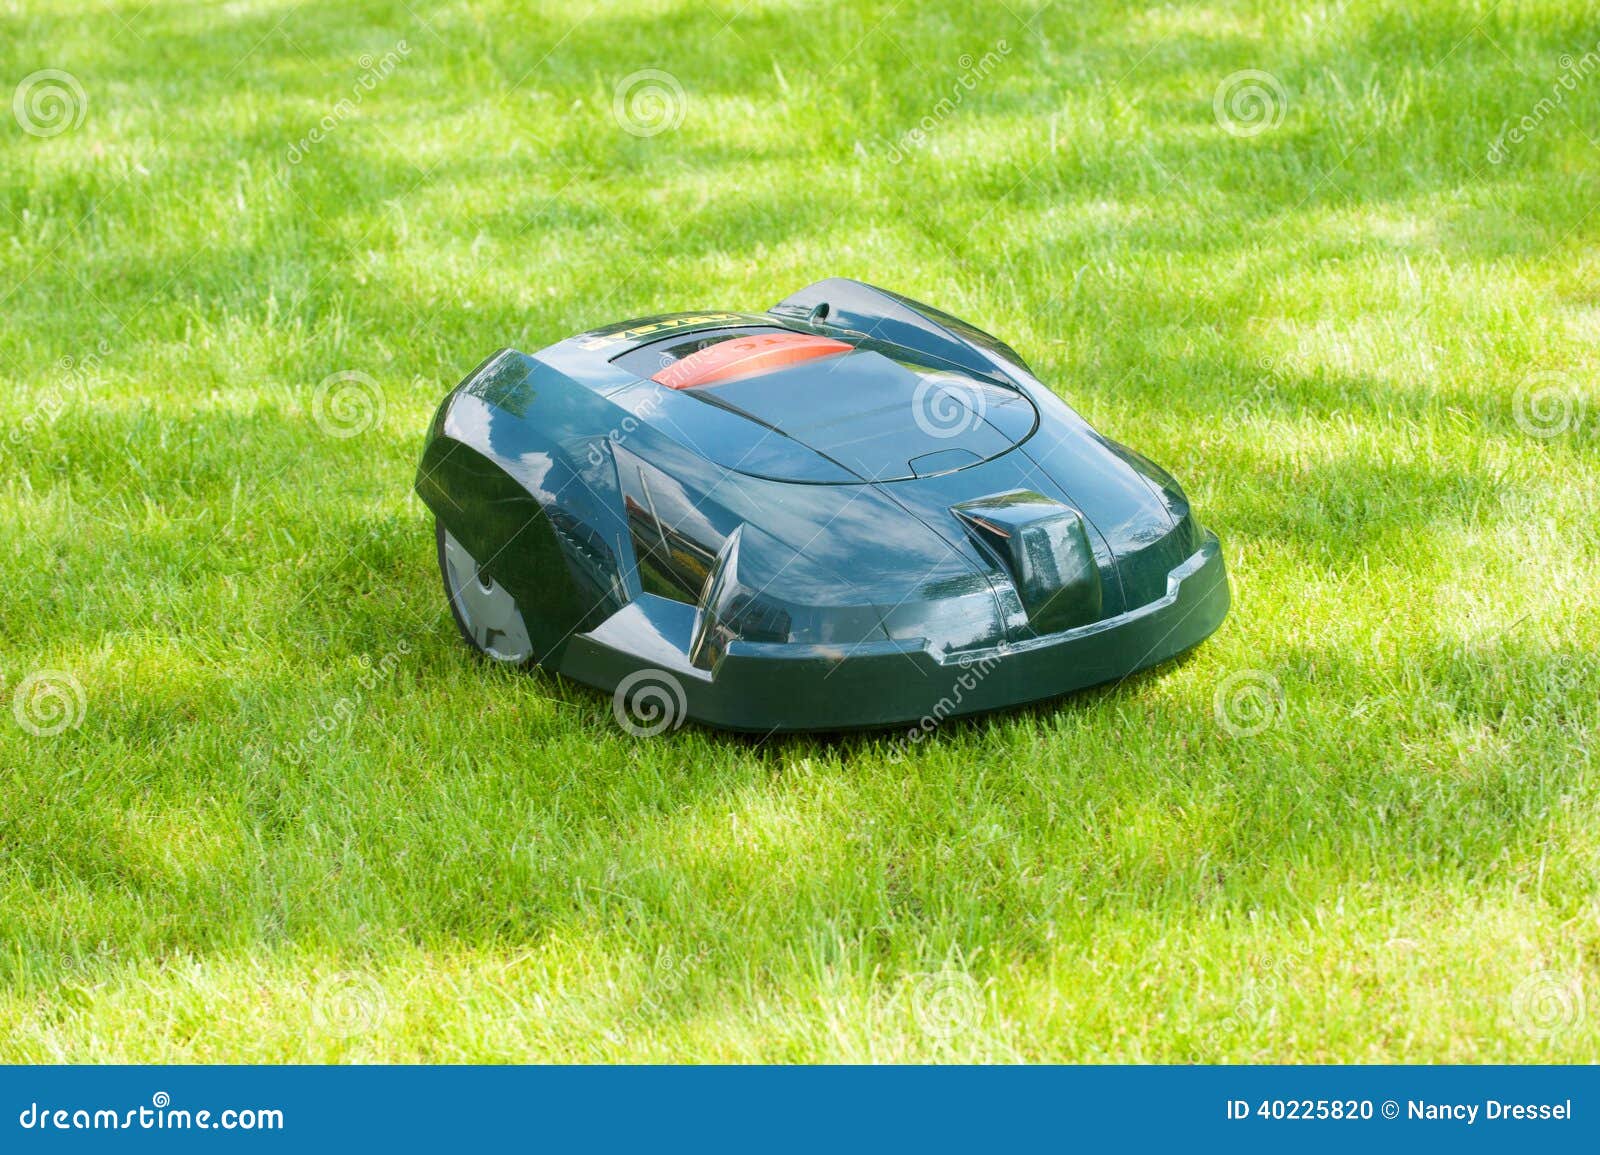 Automatic mower at work stock photo. Image of charging - 40225820